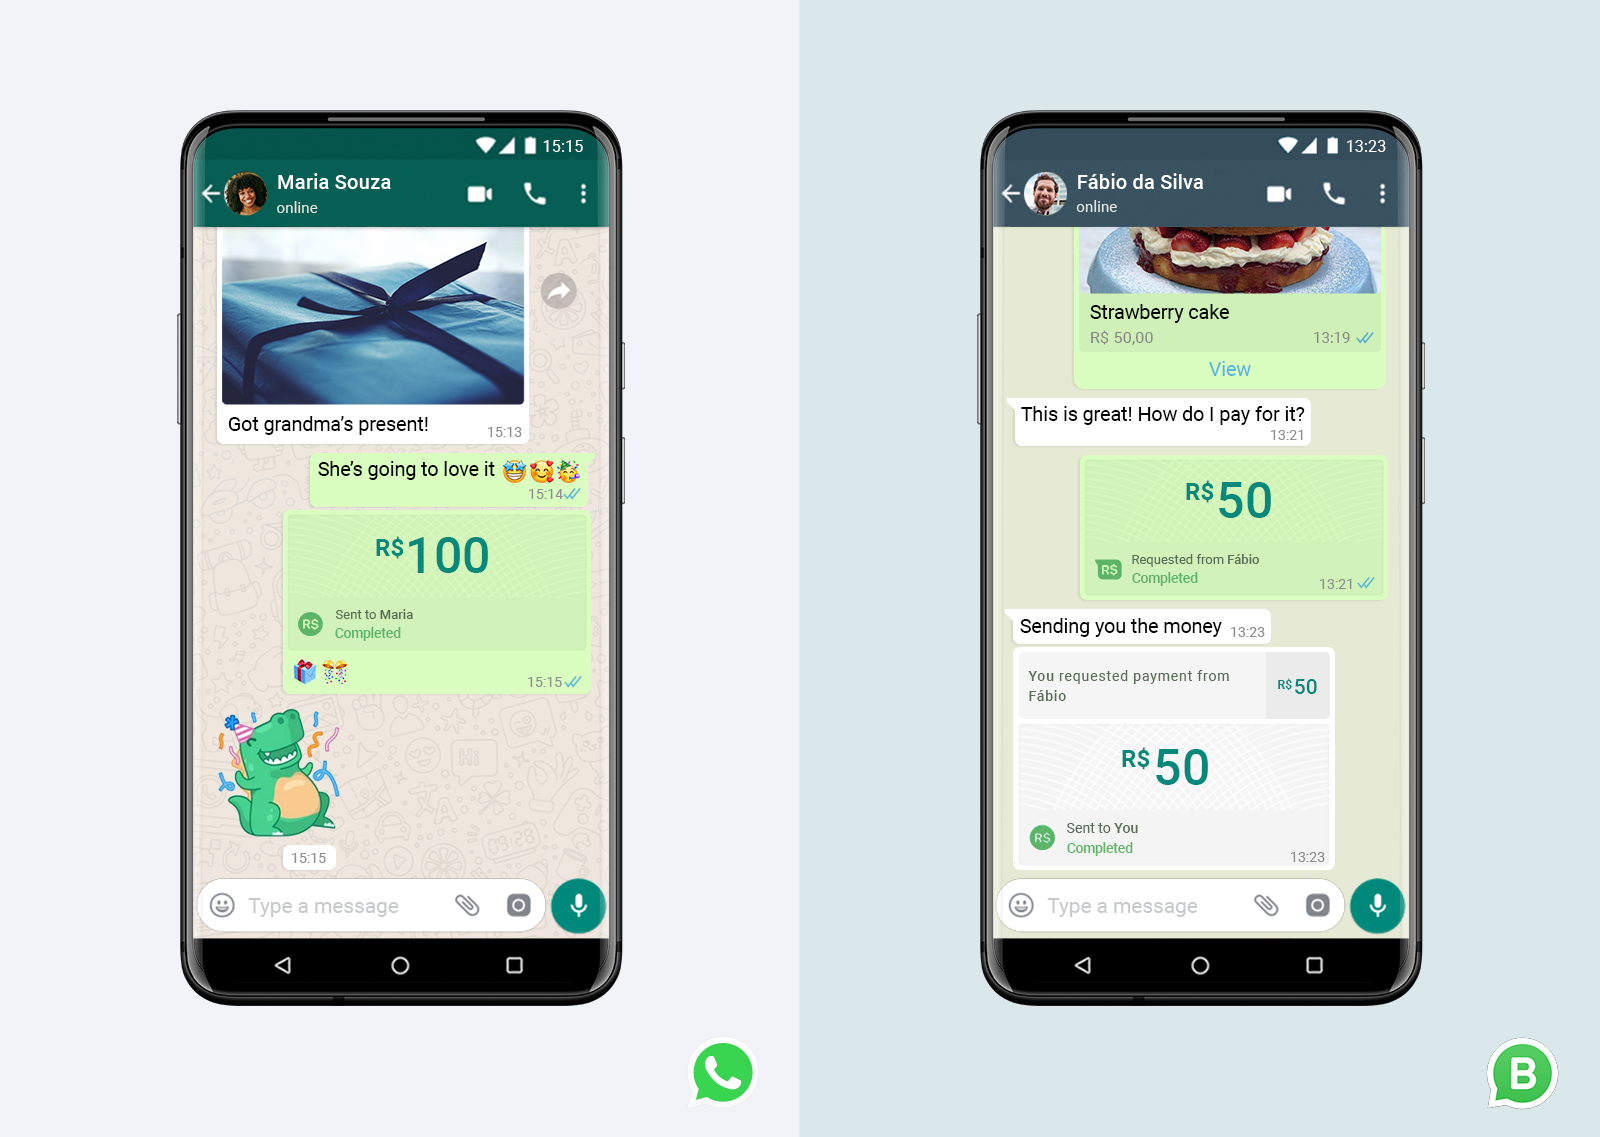 You can send money to friends or pay for goods and services - Payments can now be made through WhatsApp in one country, more to come